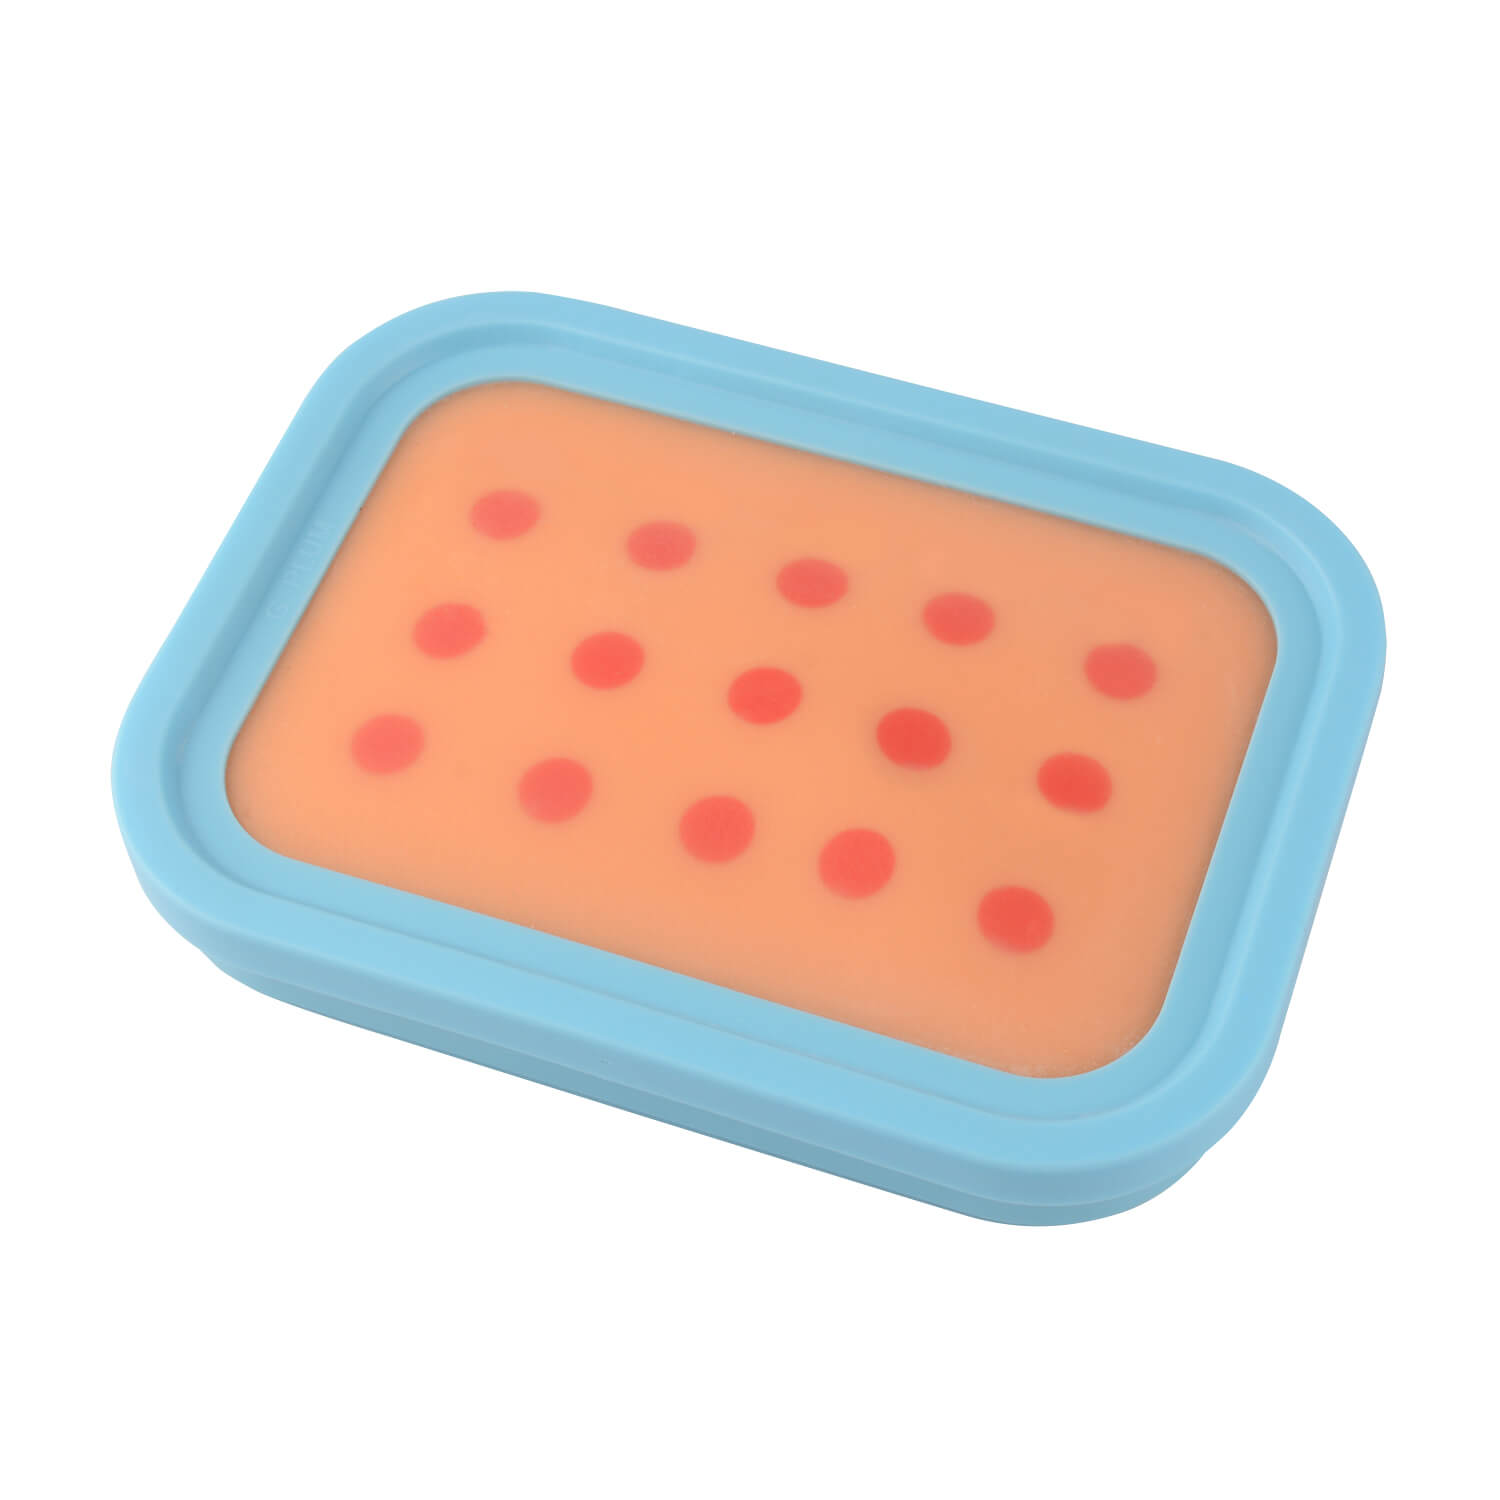 Ultrassist Injection Training Silicone Pad with Sponge for SC Practice